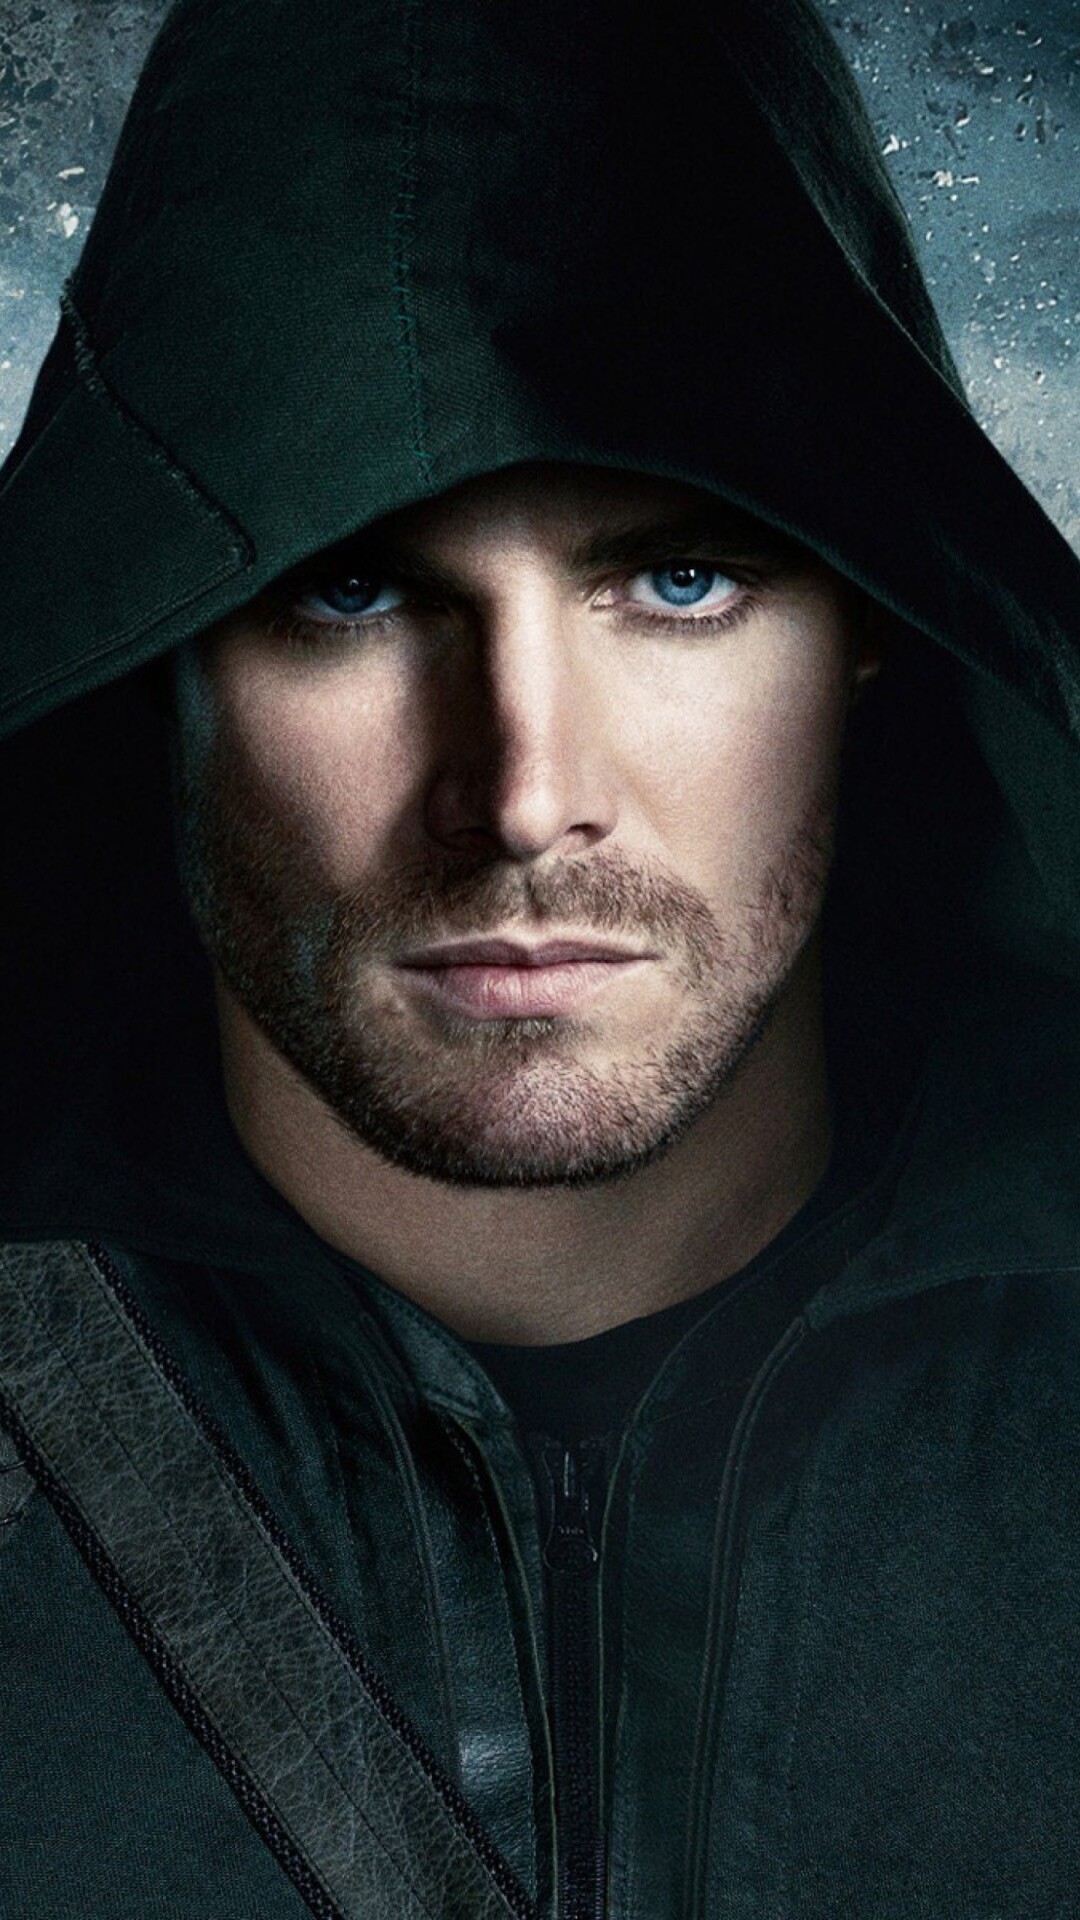 Green Arrow: Oliver Queen, A billionaire and former playboy, turned archer superhero of Star City. 1080x1920 Full HD Wallpaper.